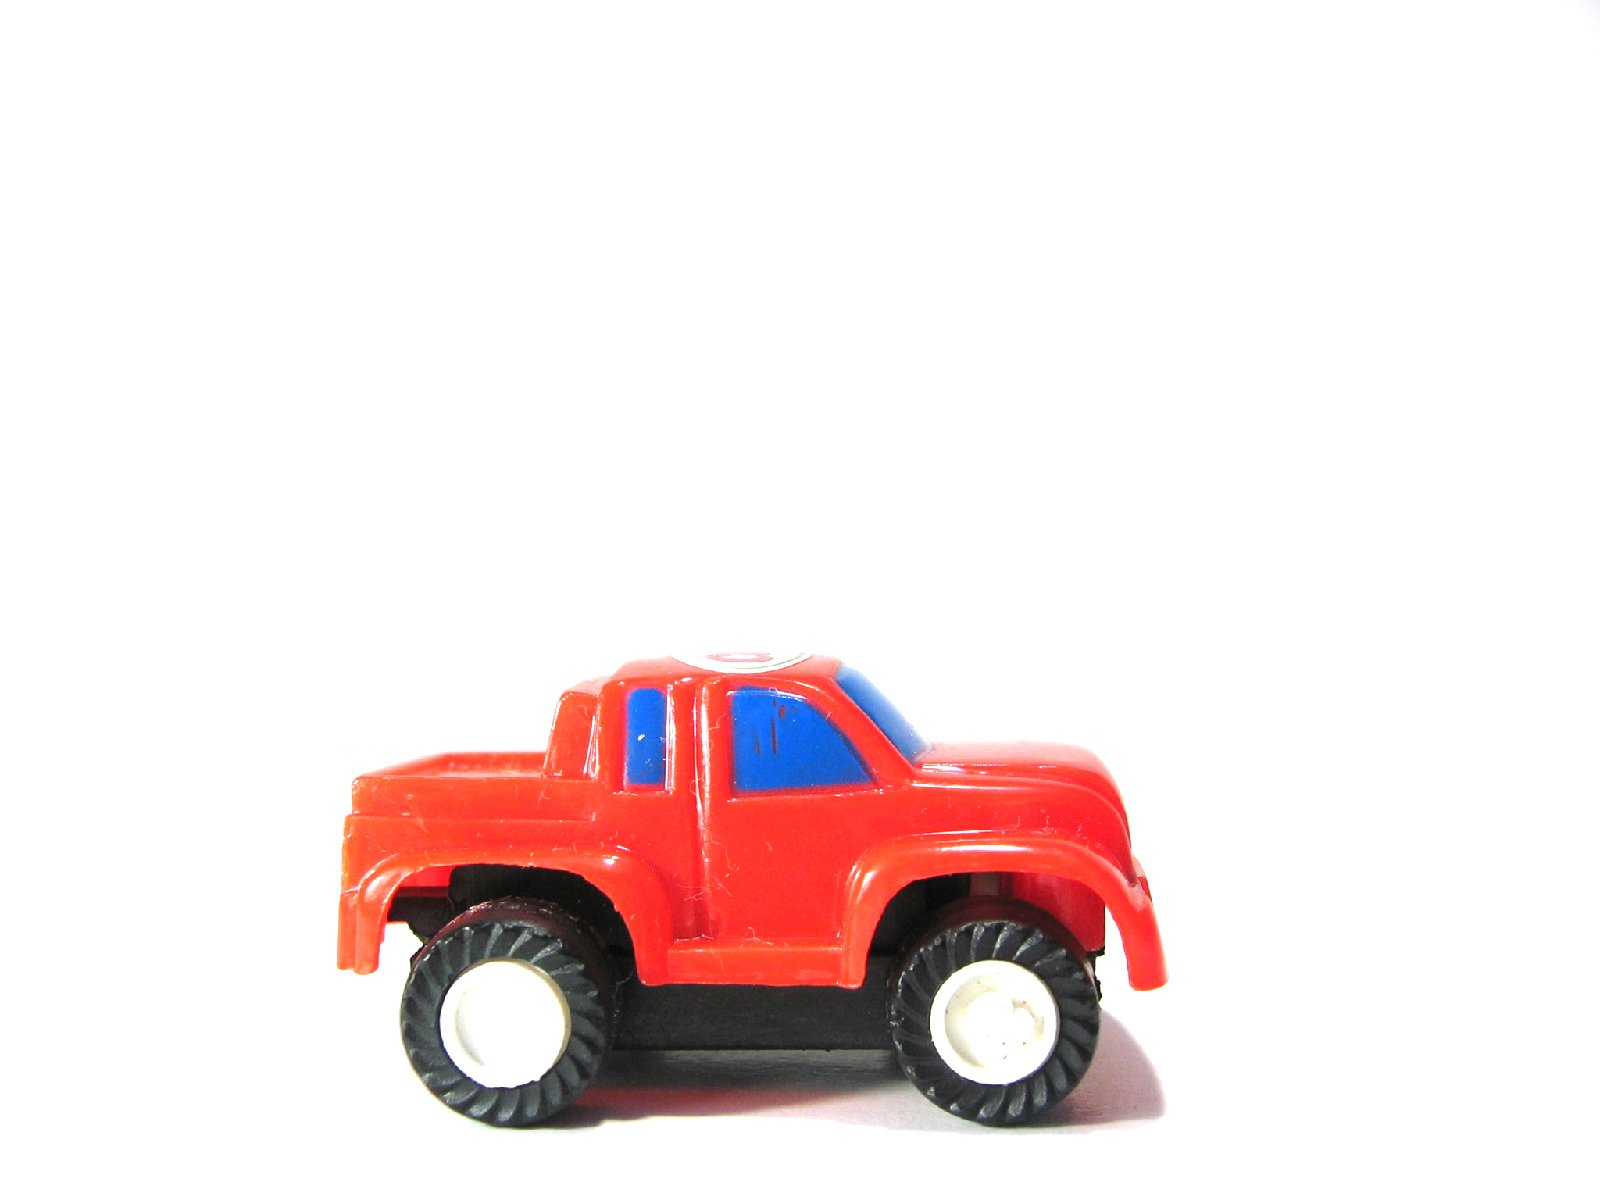 the toy truck is orange and blue on the white floor